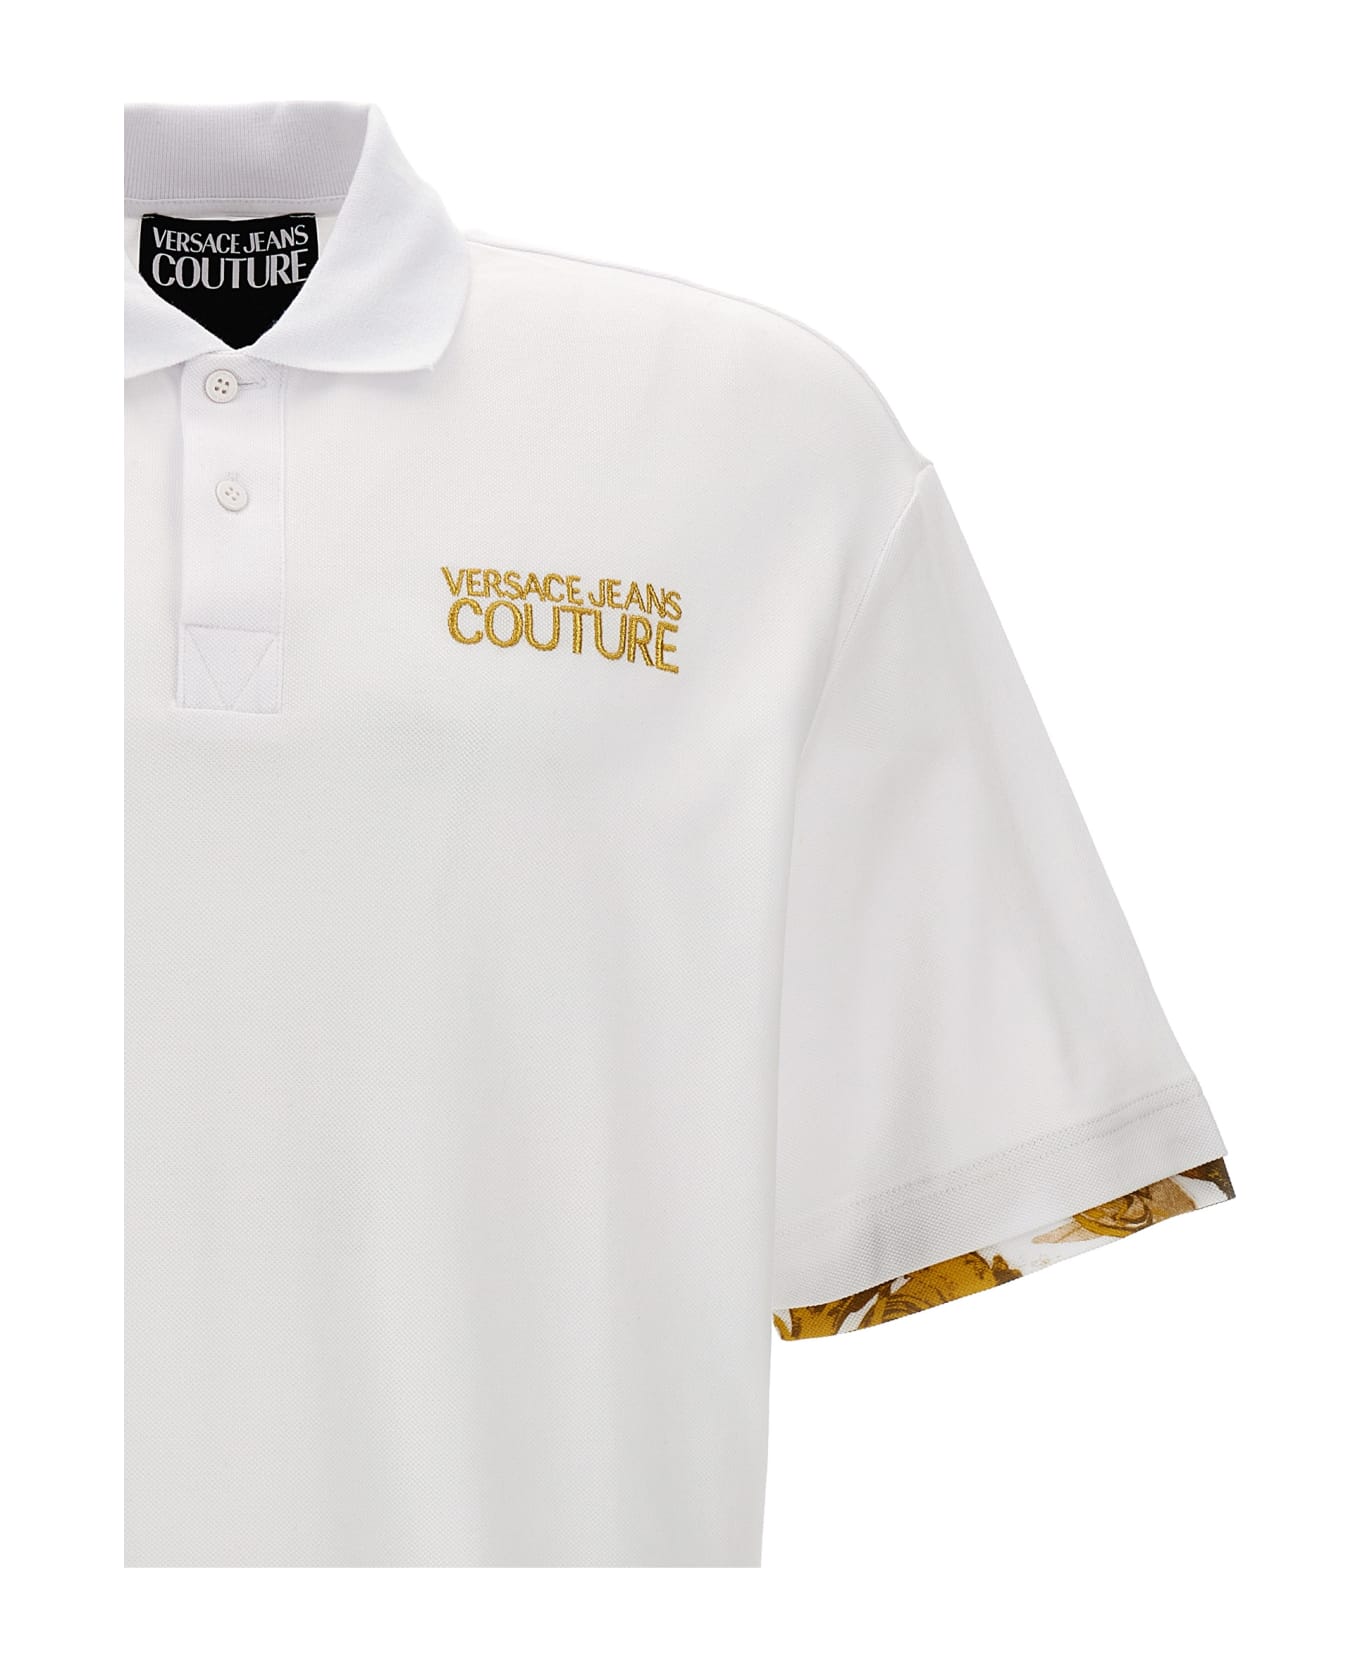 Versace Jeans Couture Polo Shirt - White